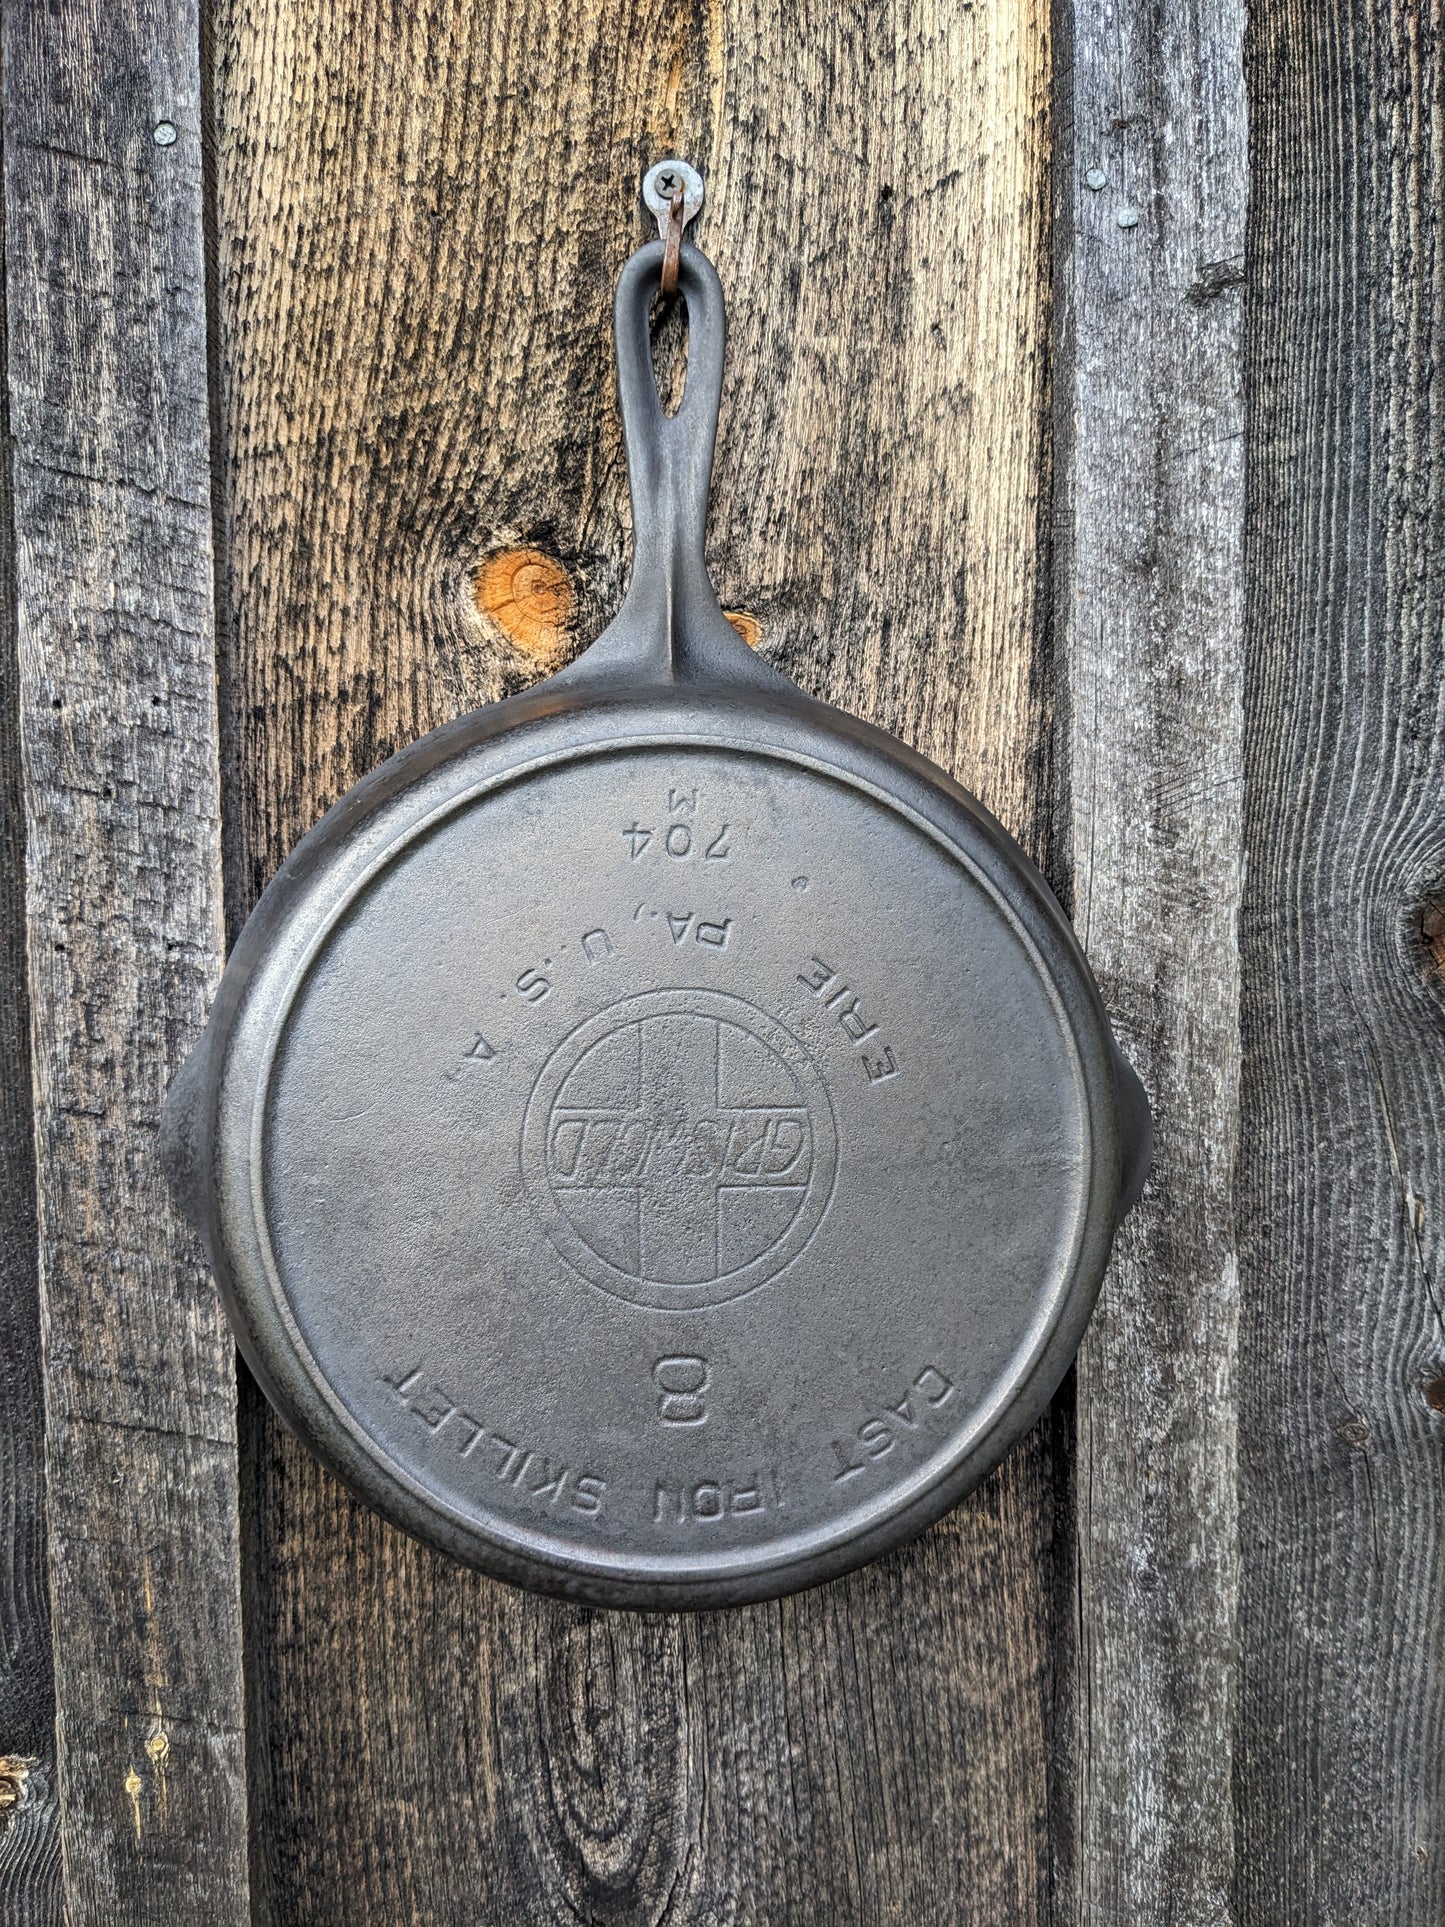 Buy the GRISWOLD No 8 Cast Iron SKILLET